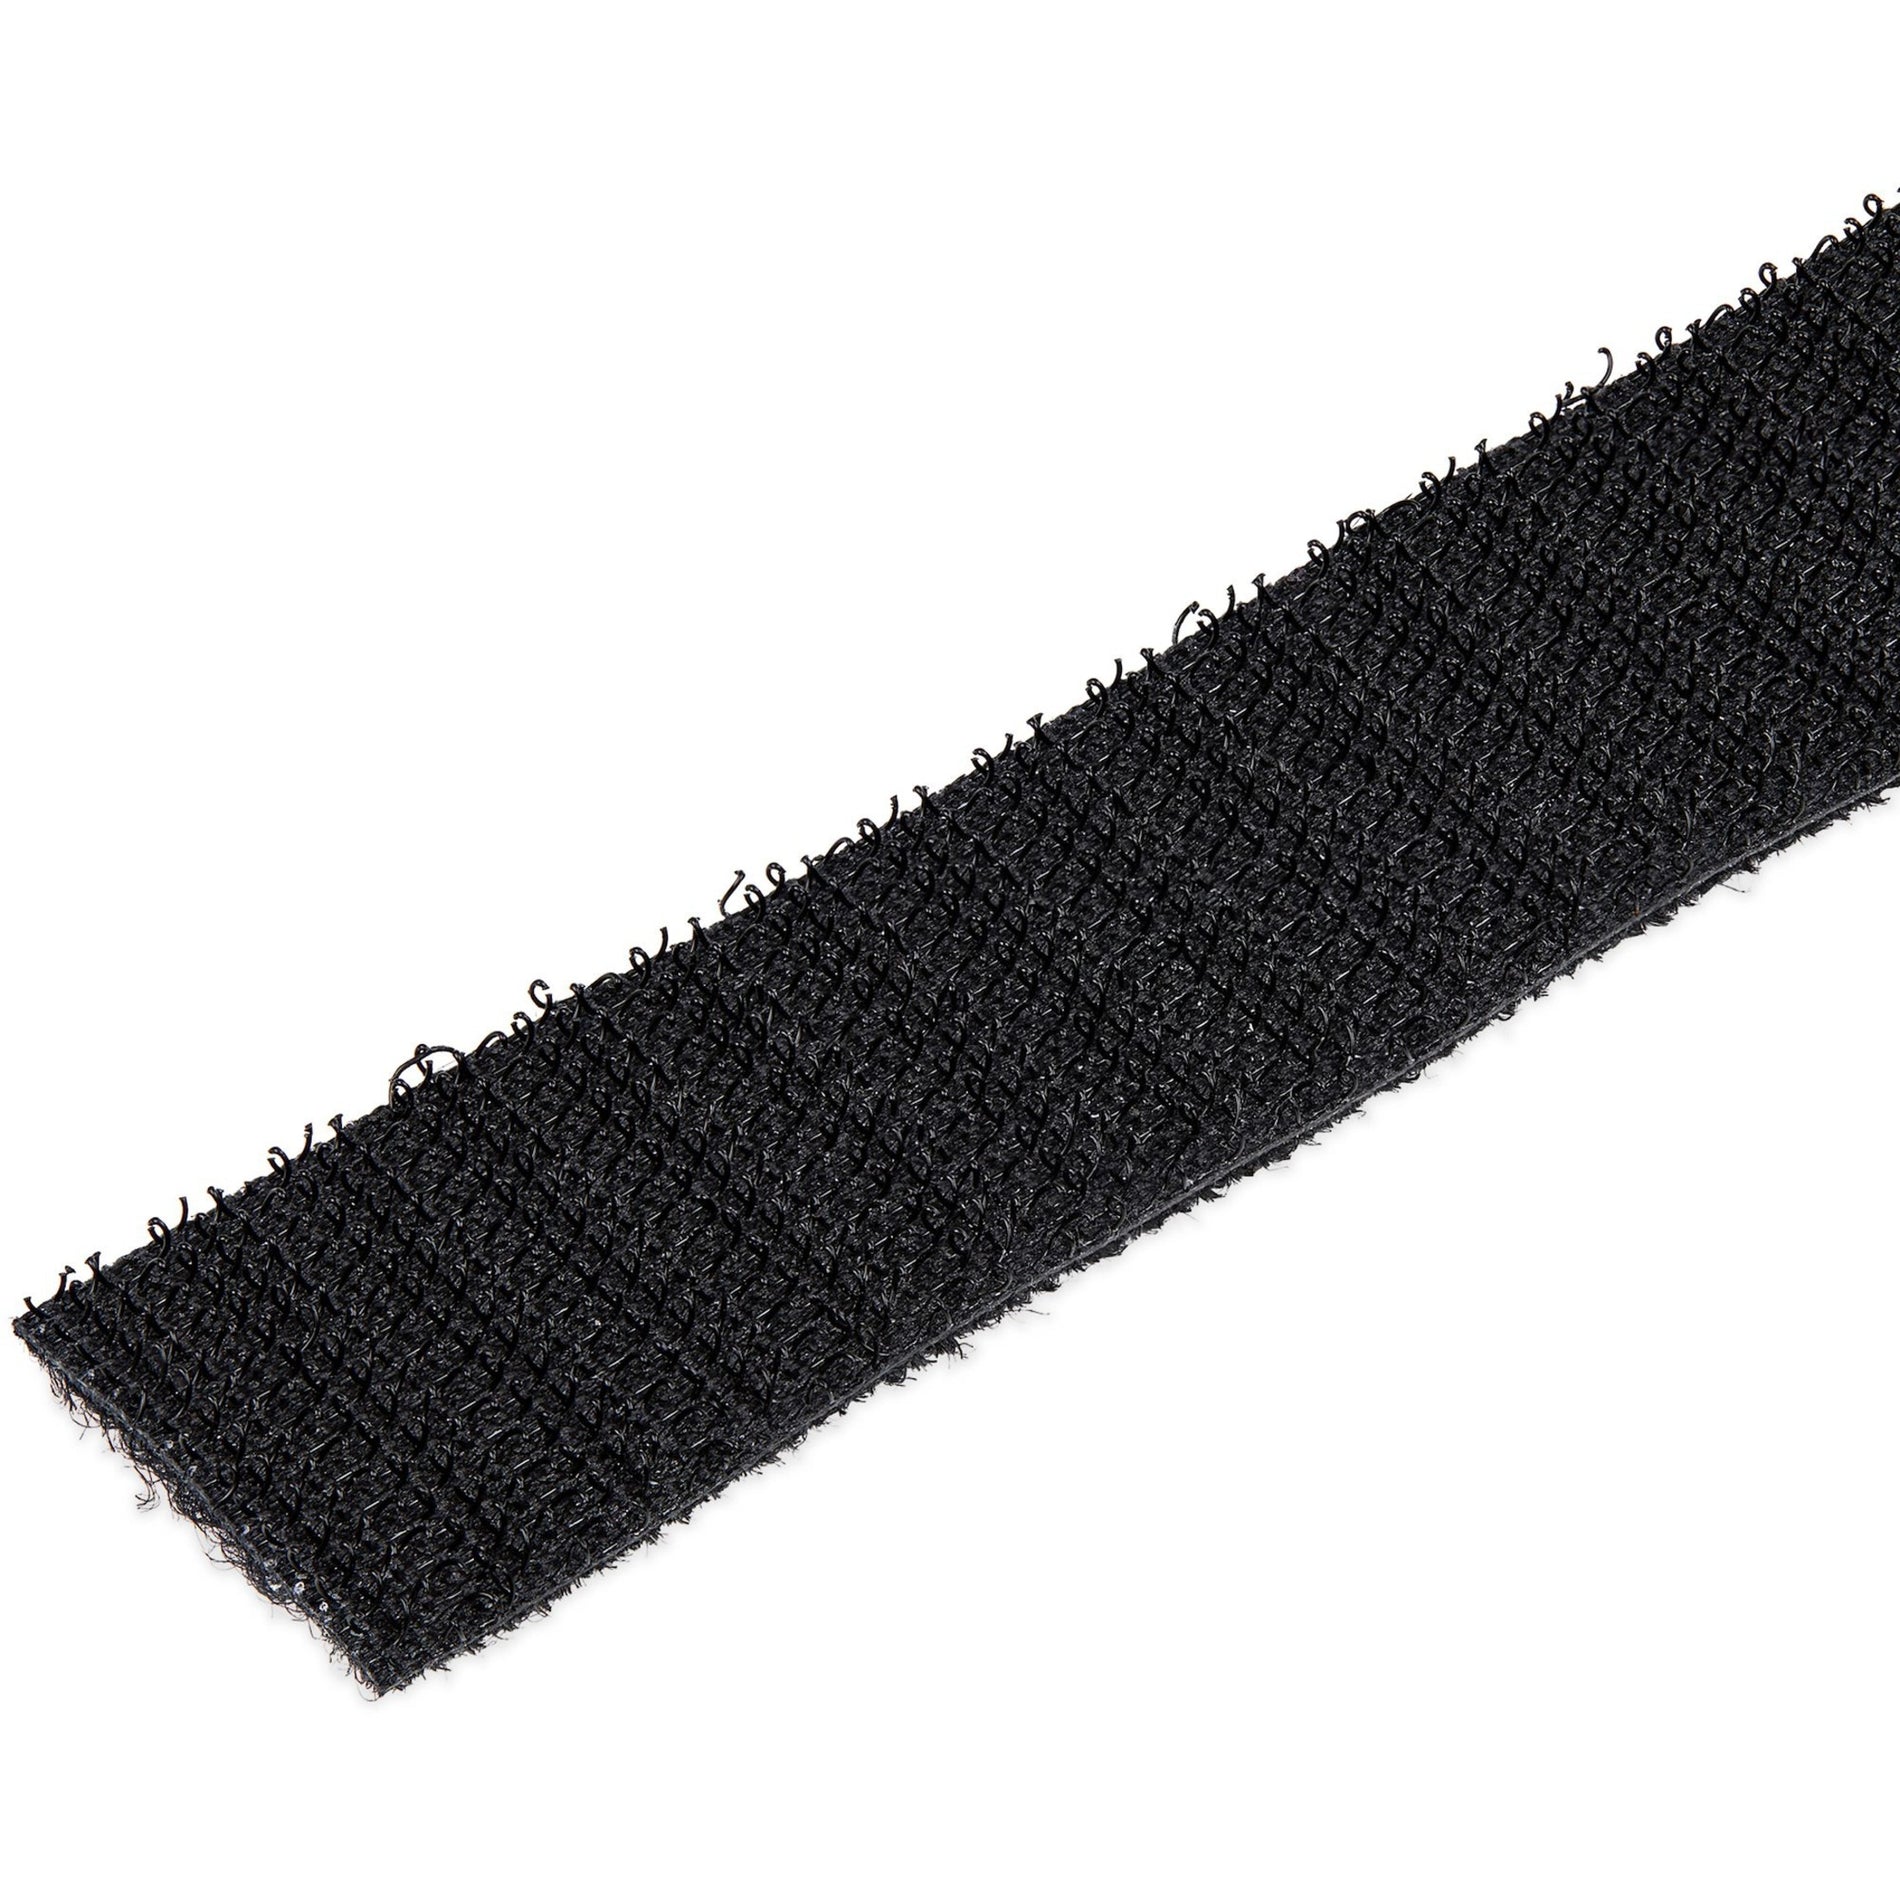 StarTech.com HKLP50 Hook-and-Loop Cable Tie - 50 ft. Bulk Roll, Black - Cut-to-Size Cable Wrap/Straps